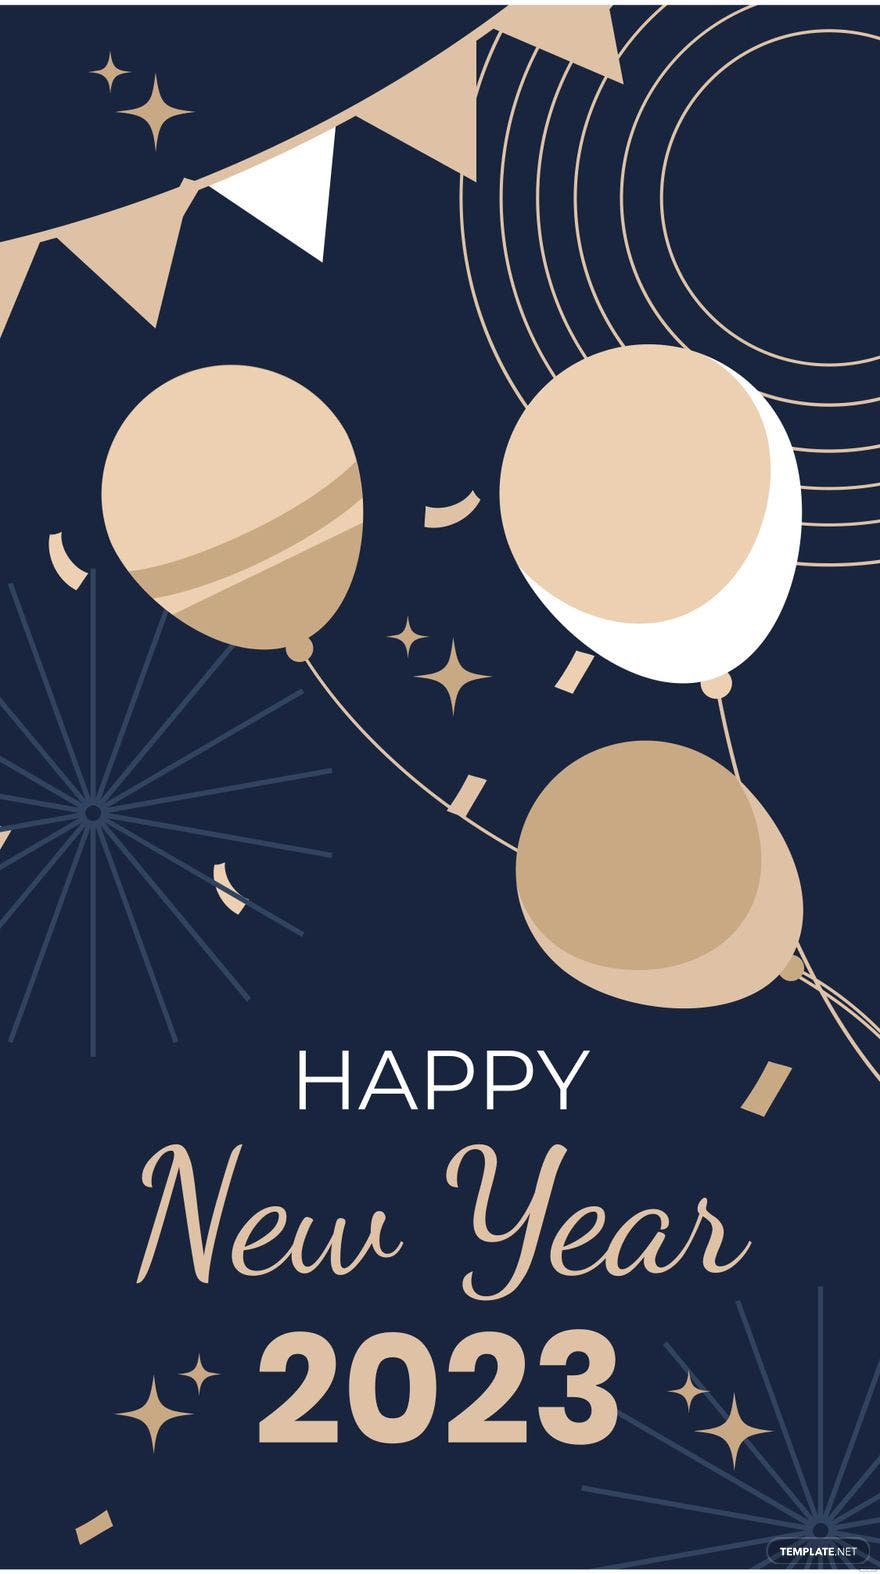 New Year's Day iPhone Background, Illustrator, JPEG, PSD, PNG, PDF, SVG